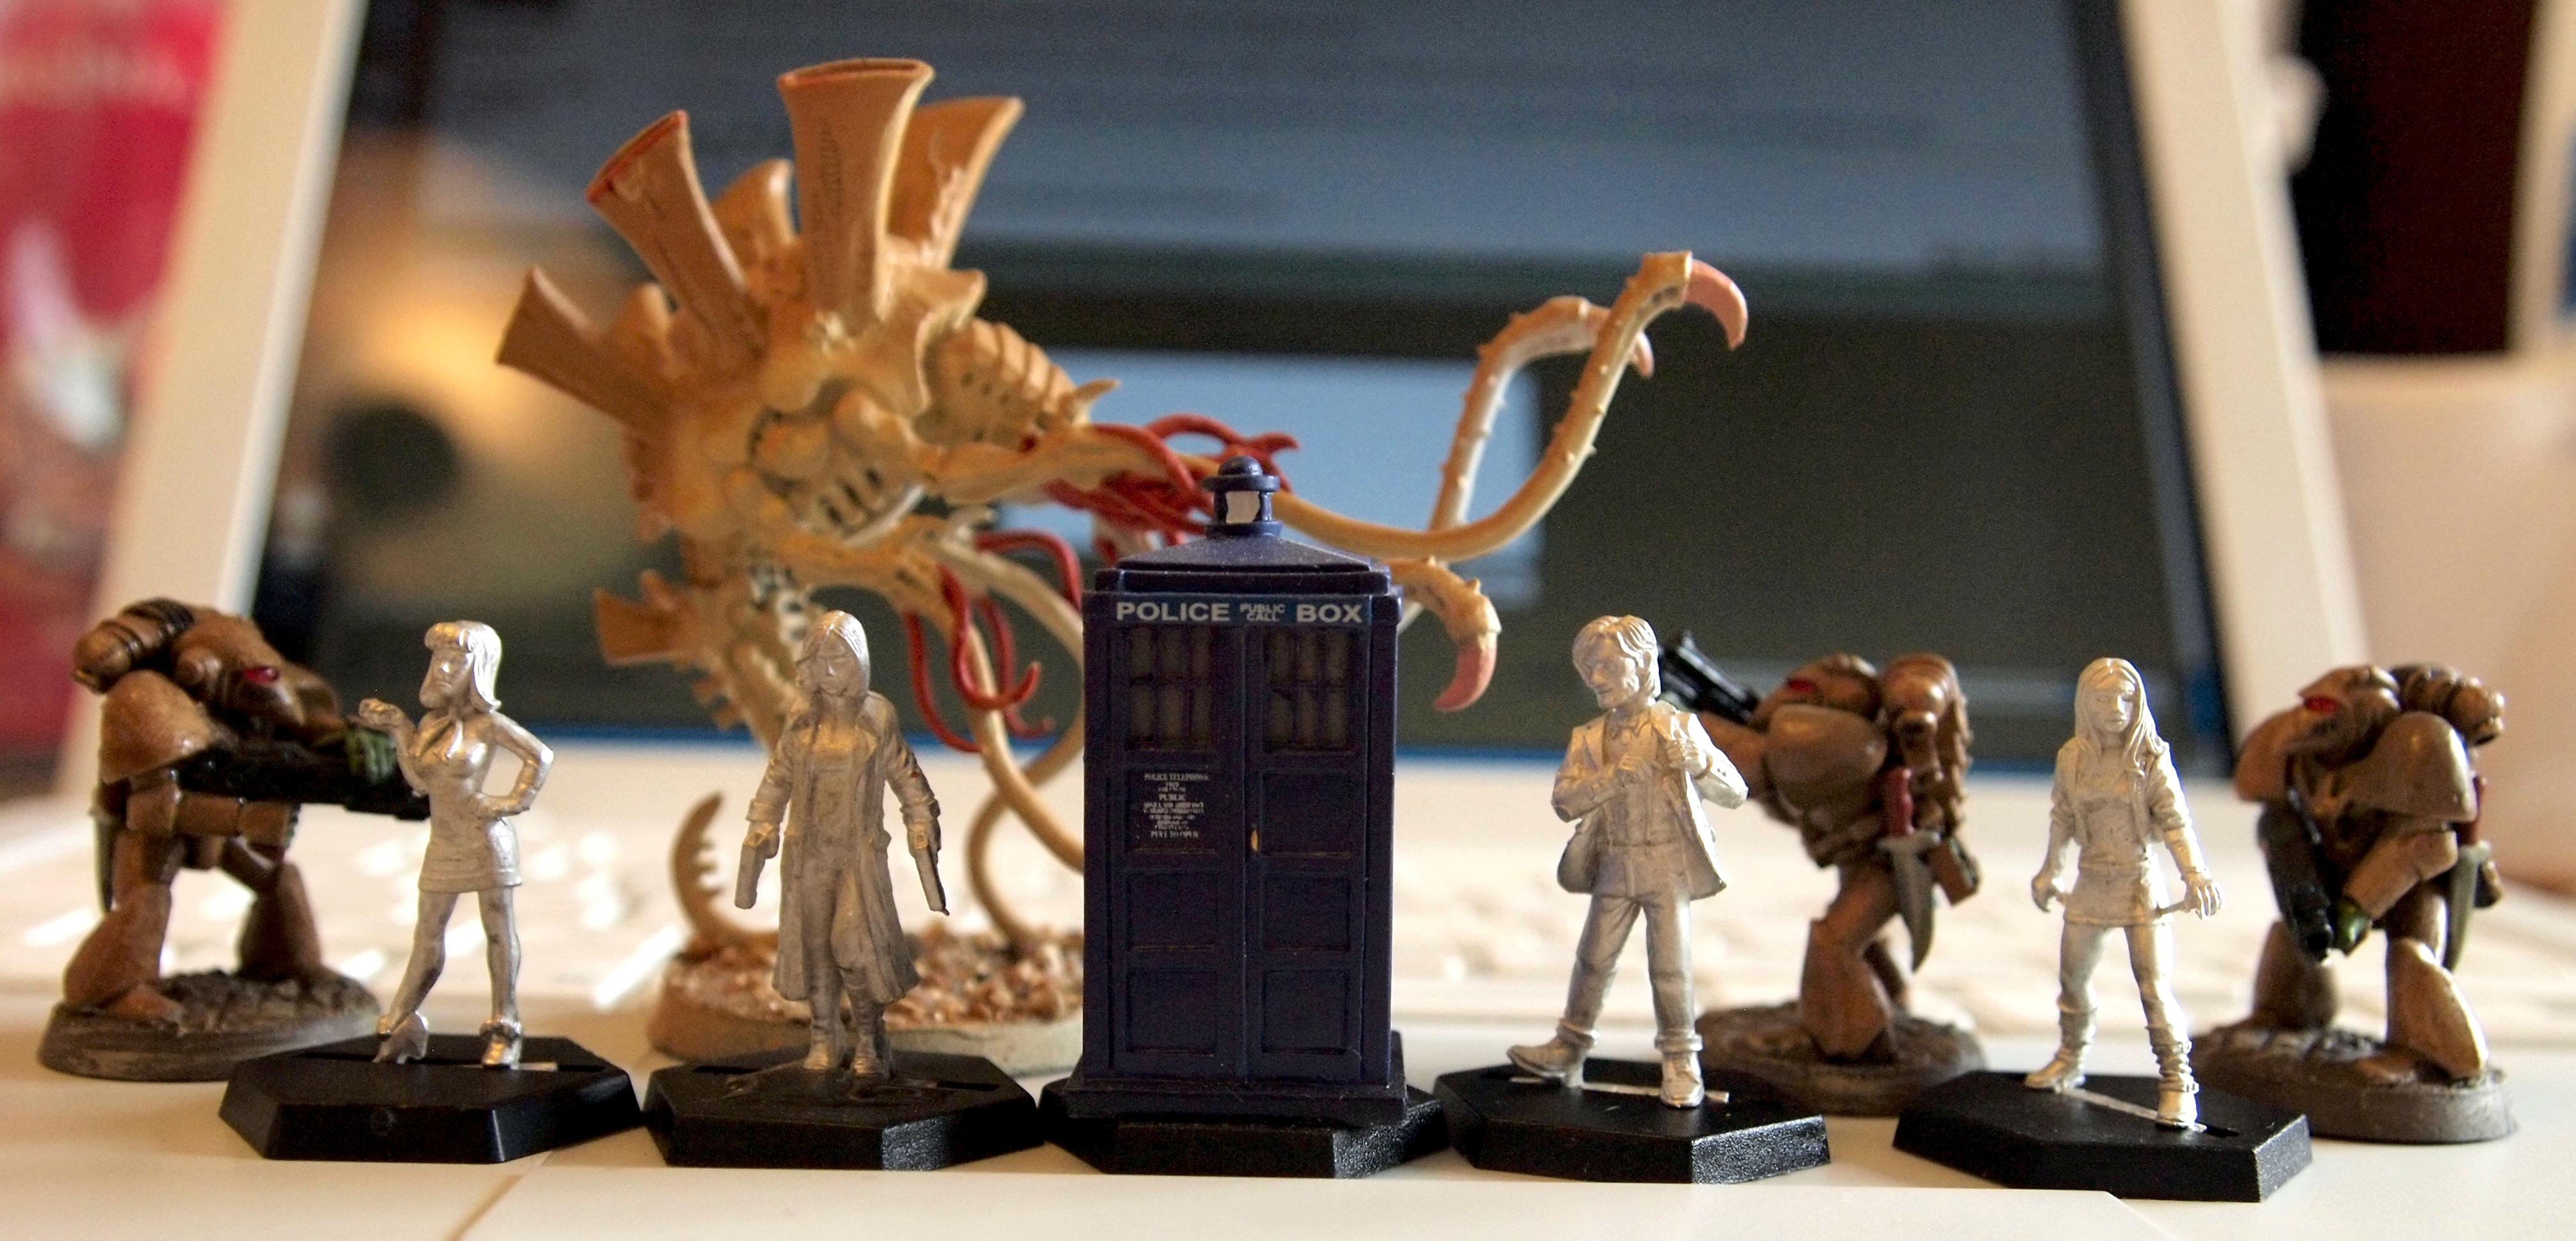 Dr Who, Hasslefree, Heresy, Scale, Science-fiction, Warhammer 40,000, Work In Progress